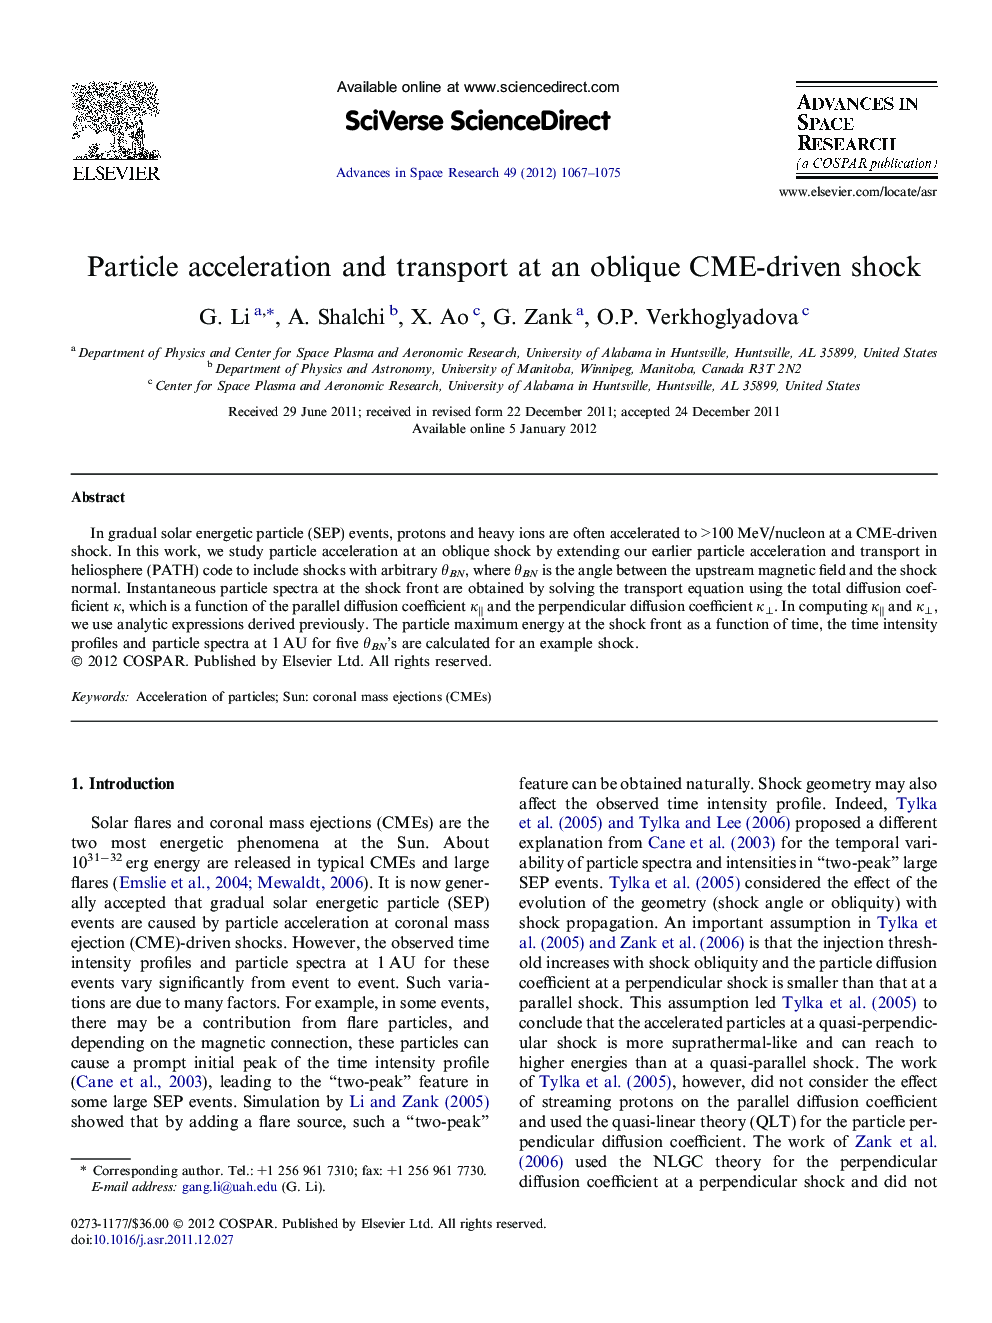 Particle acceleration and transport at an oblique CME-driven shock